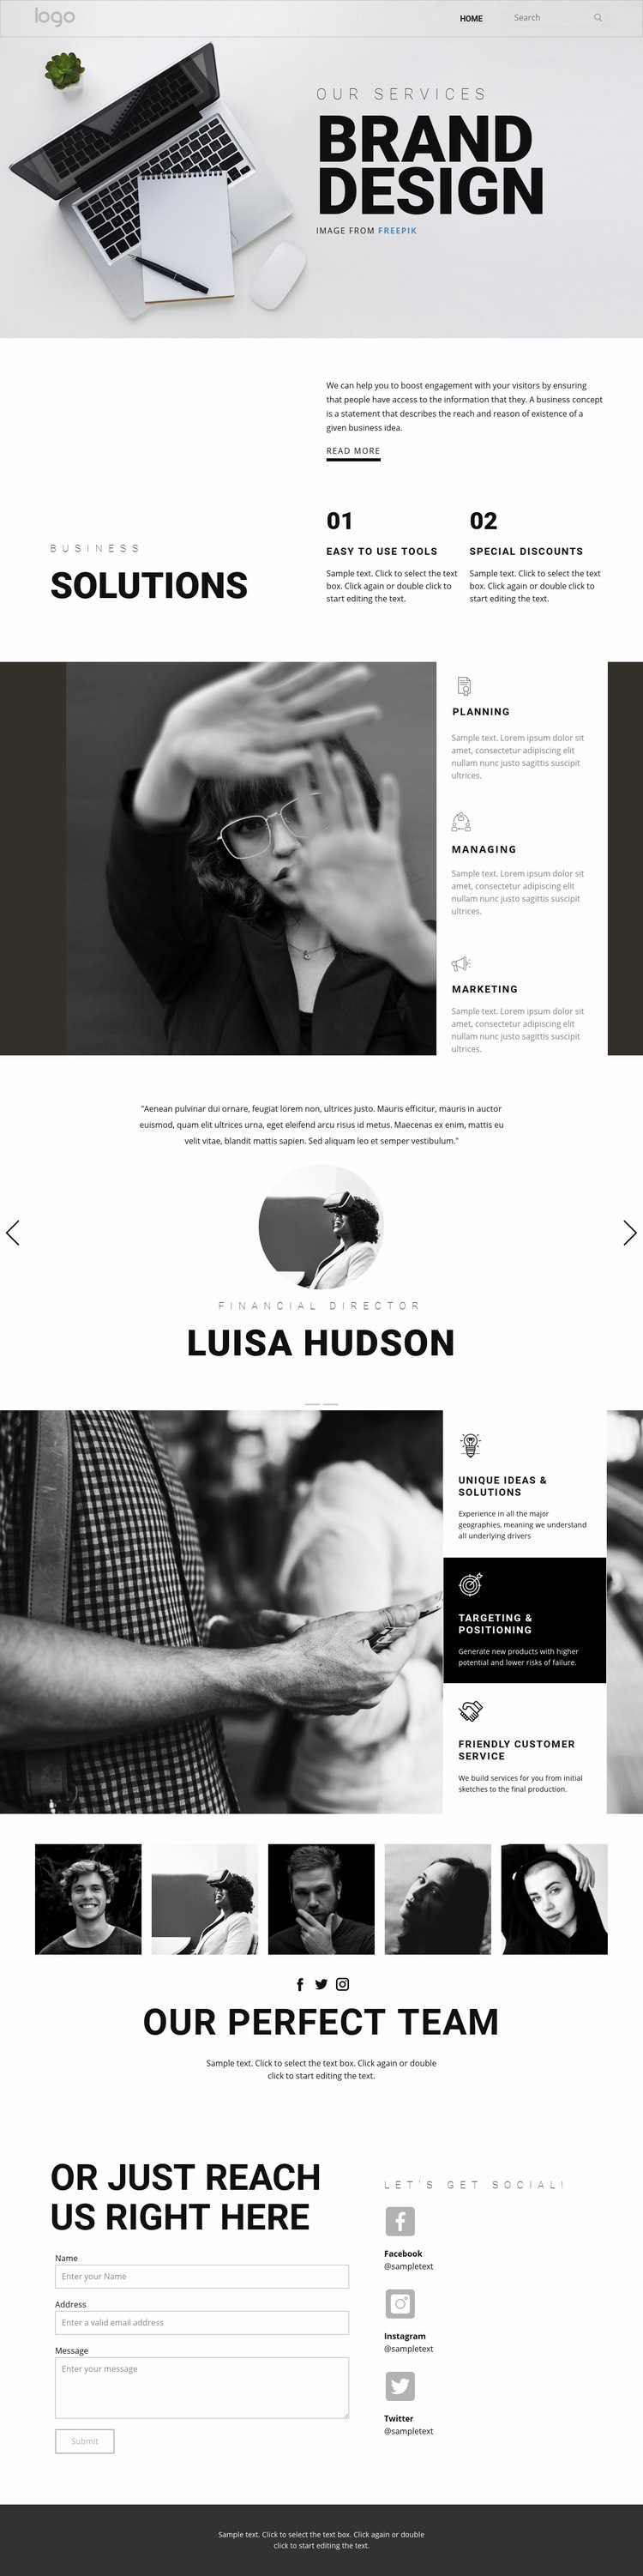 Doing branding for business Web Page Design